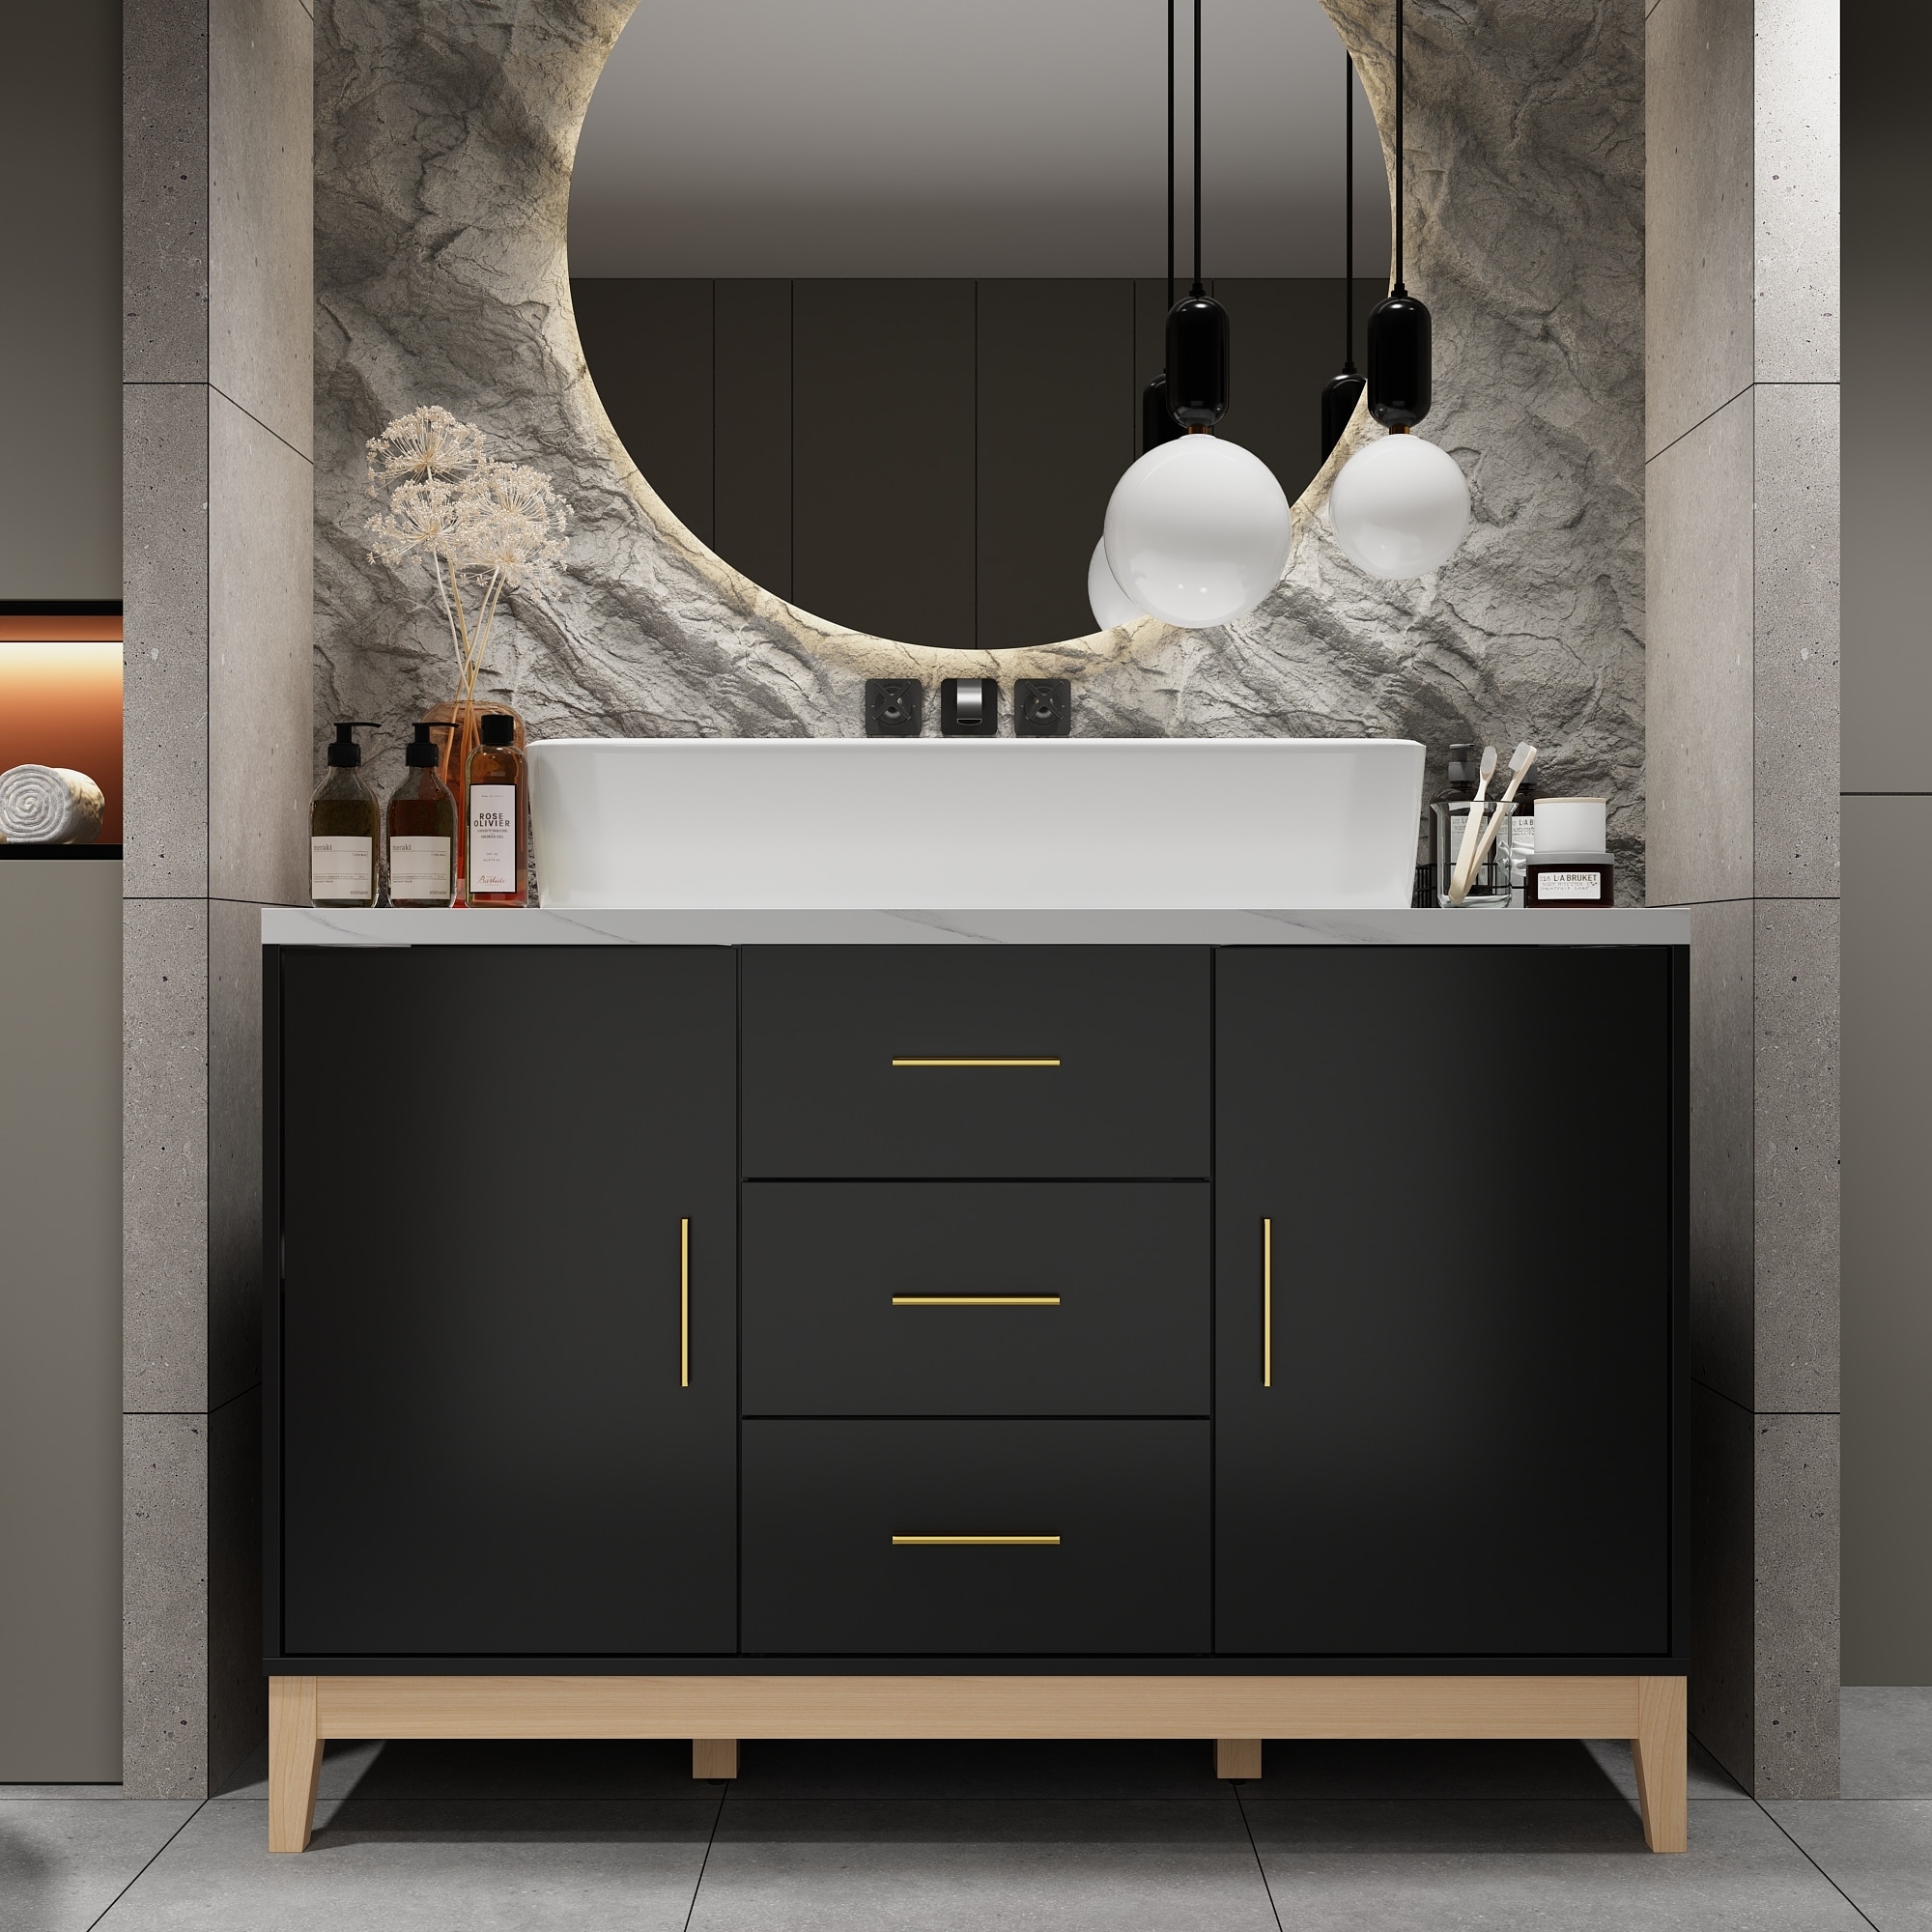 https://ak1.ostkcdn.com/images/products/is/images/direct/58dc4901f3b53854e3ed520c707b82d71966cbe4/Free-Standing-Single-Bathroom-Vanity-with-Top-Lacquer-Black-Gold.jpg